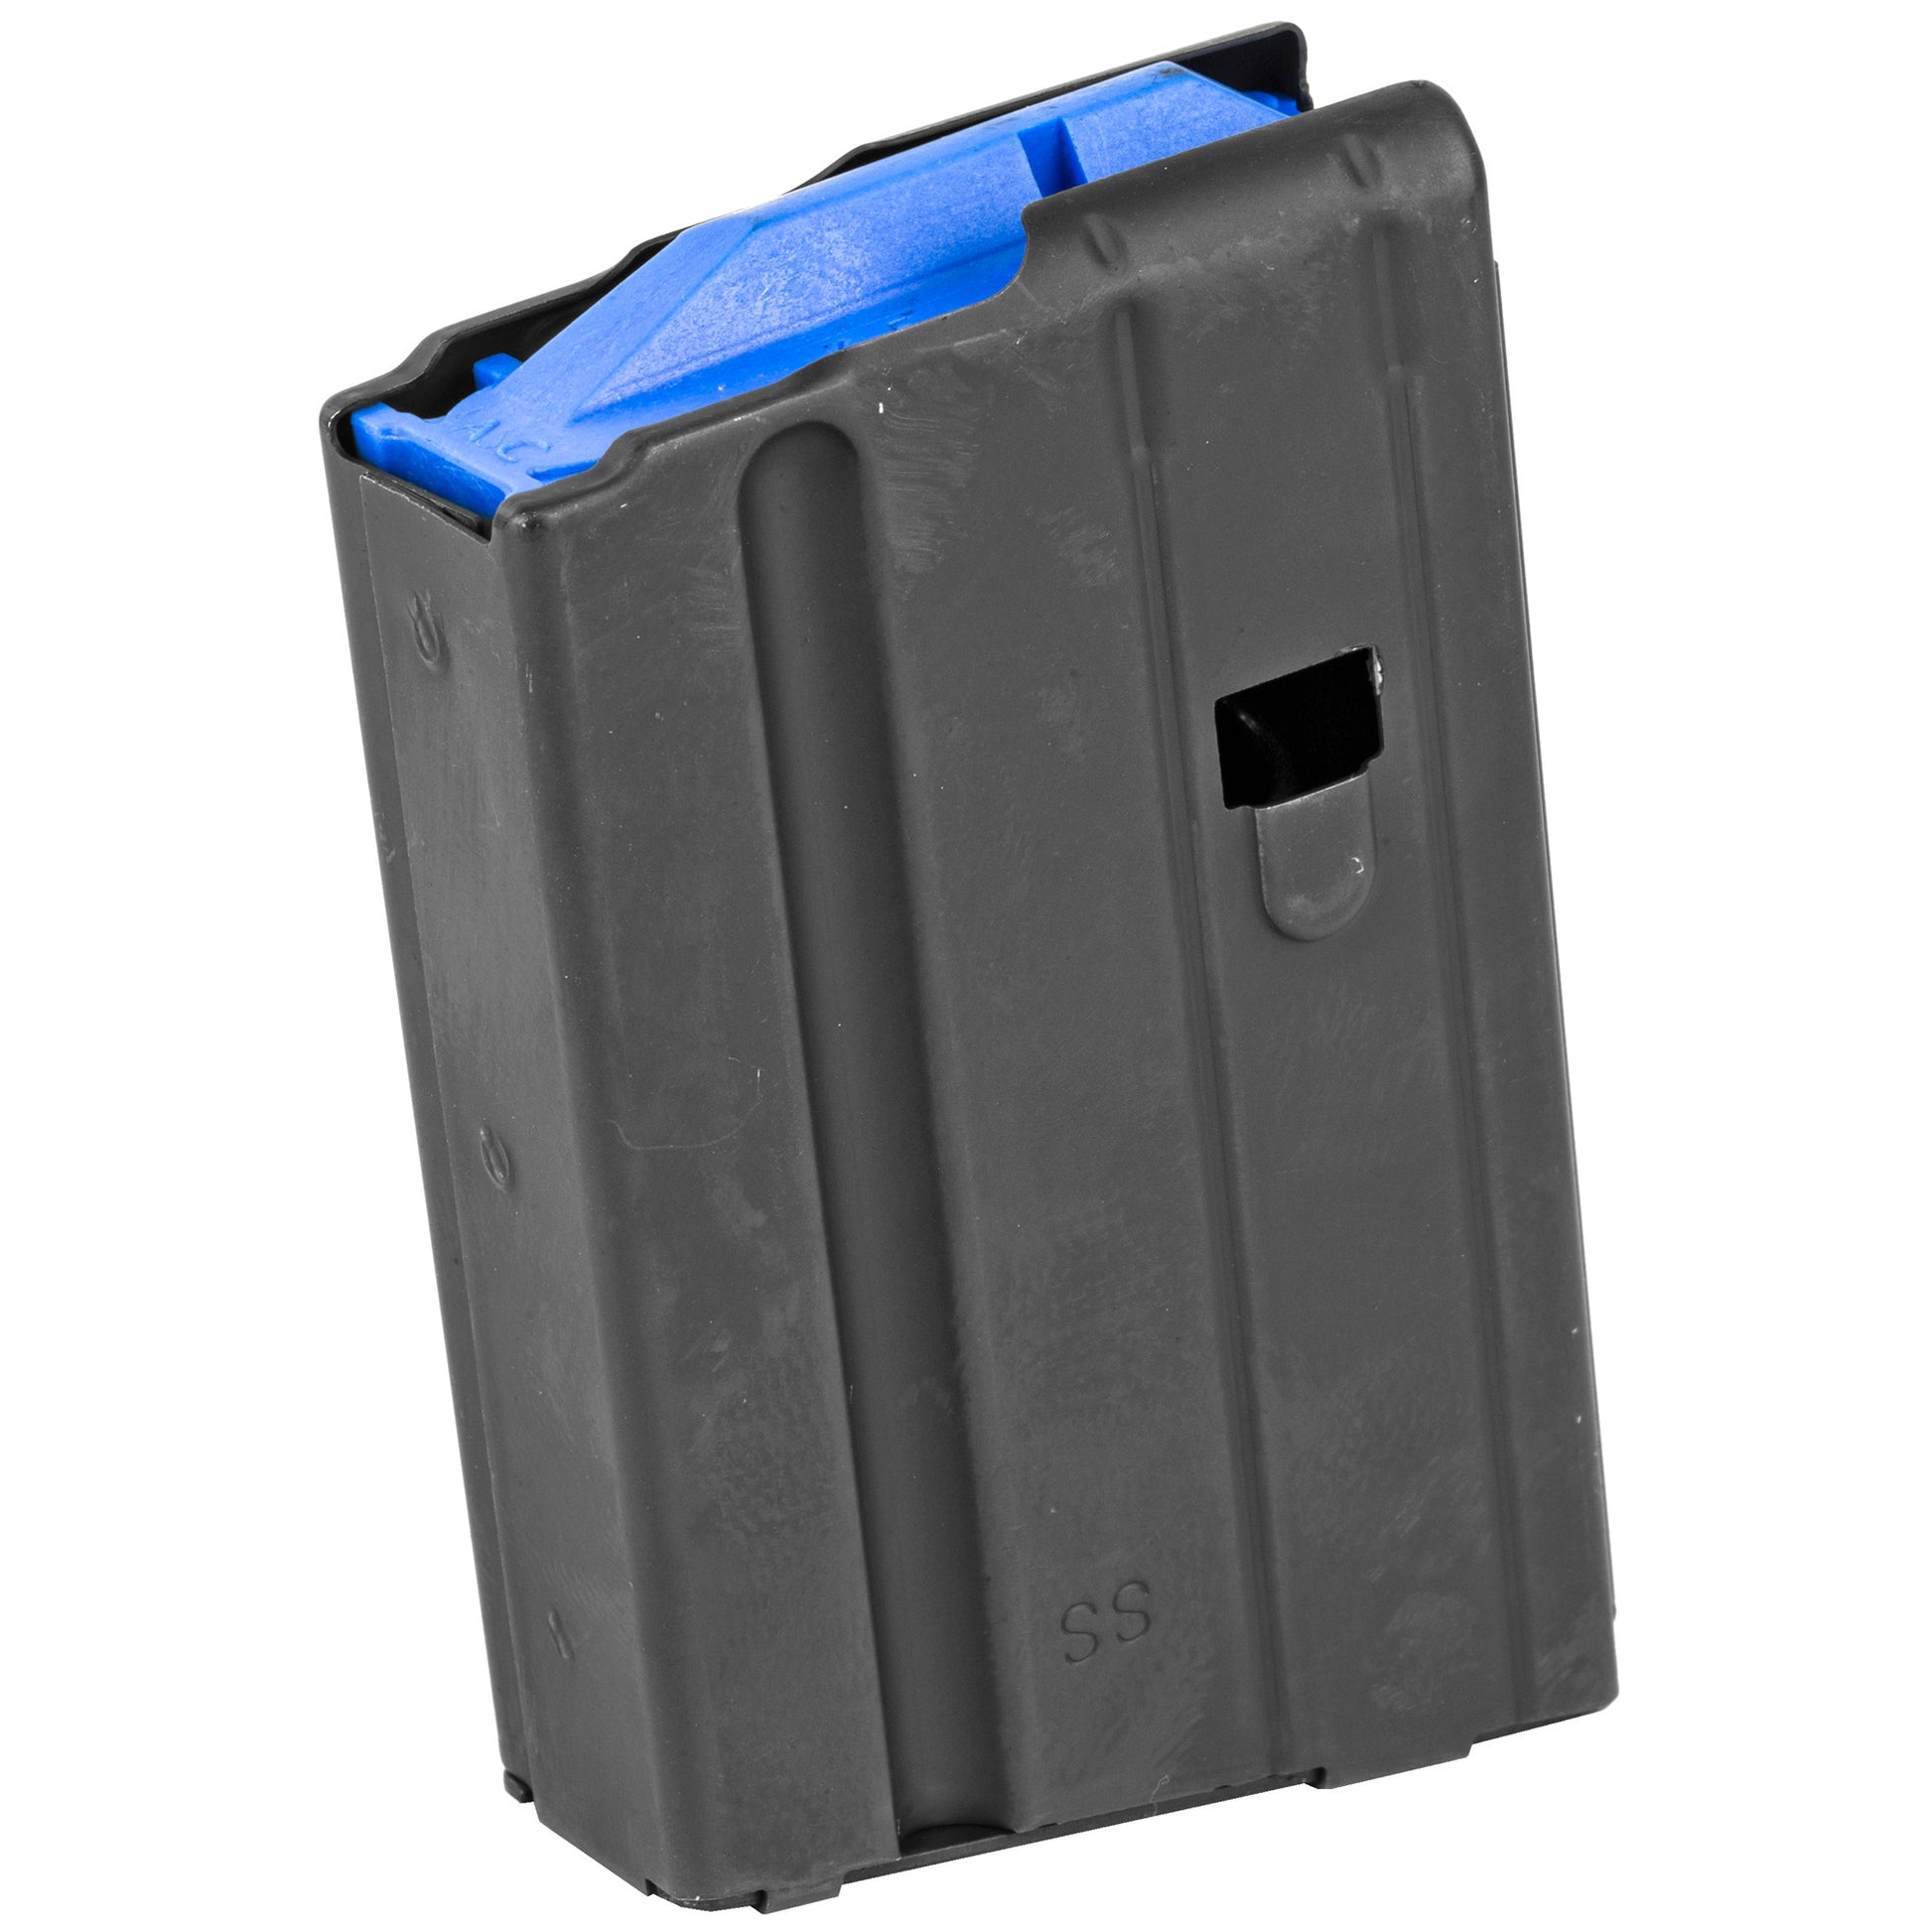 Ammo Storage Components Magazine 6.5 Grend 5 Rounds Fits AR Rifles 565SSBMBLASC - California Shooting Supplies